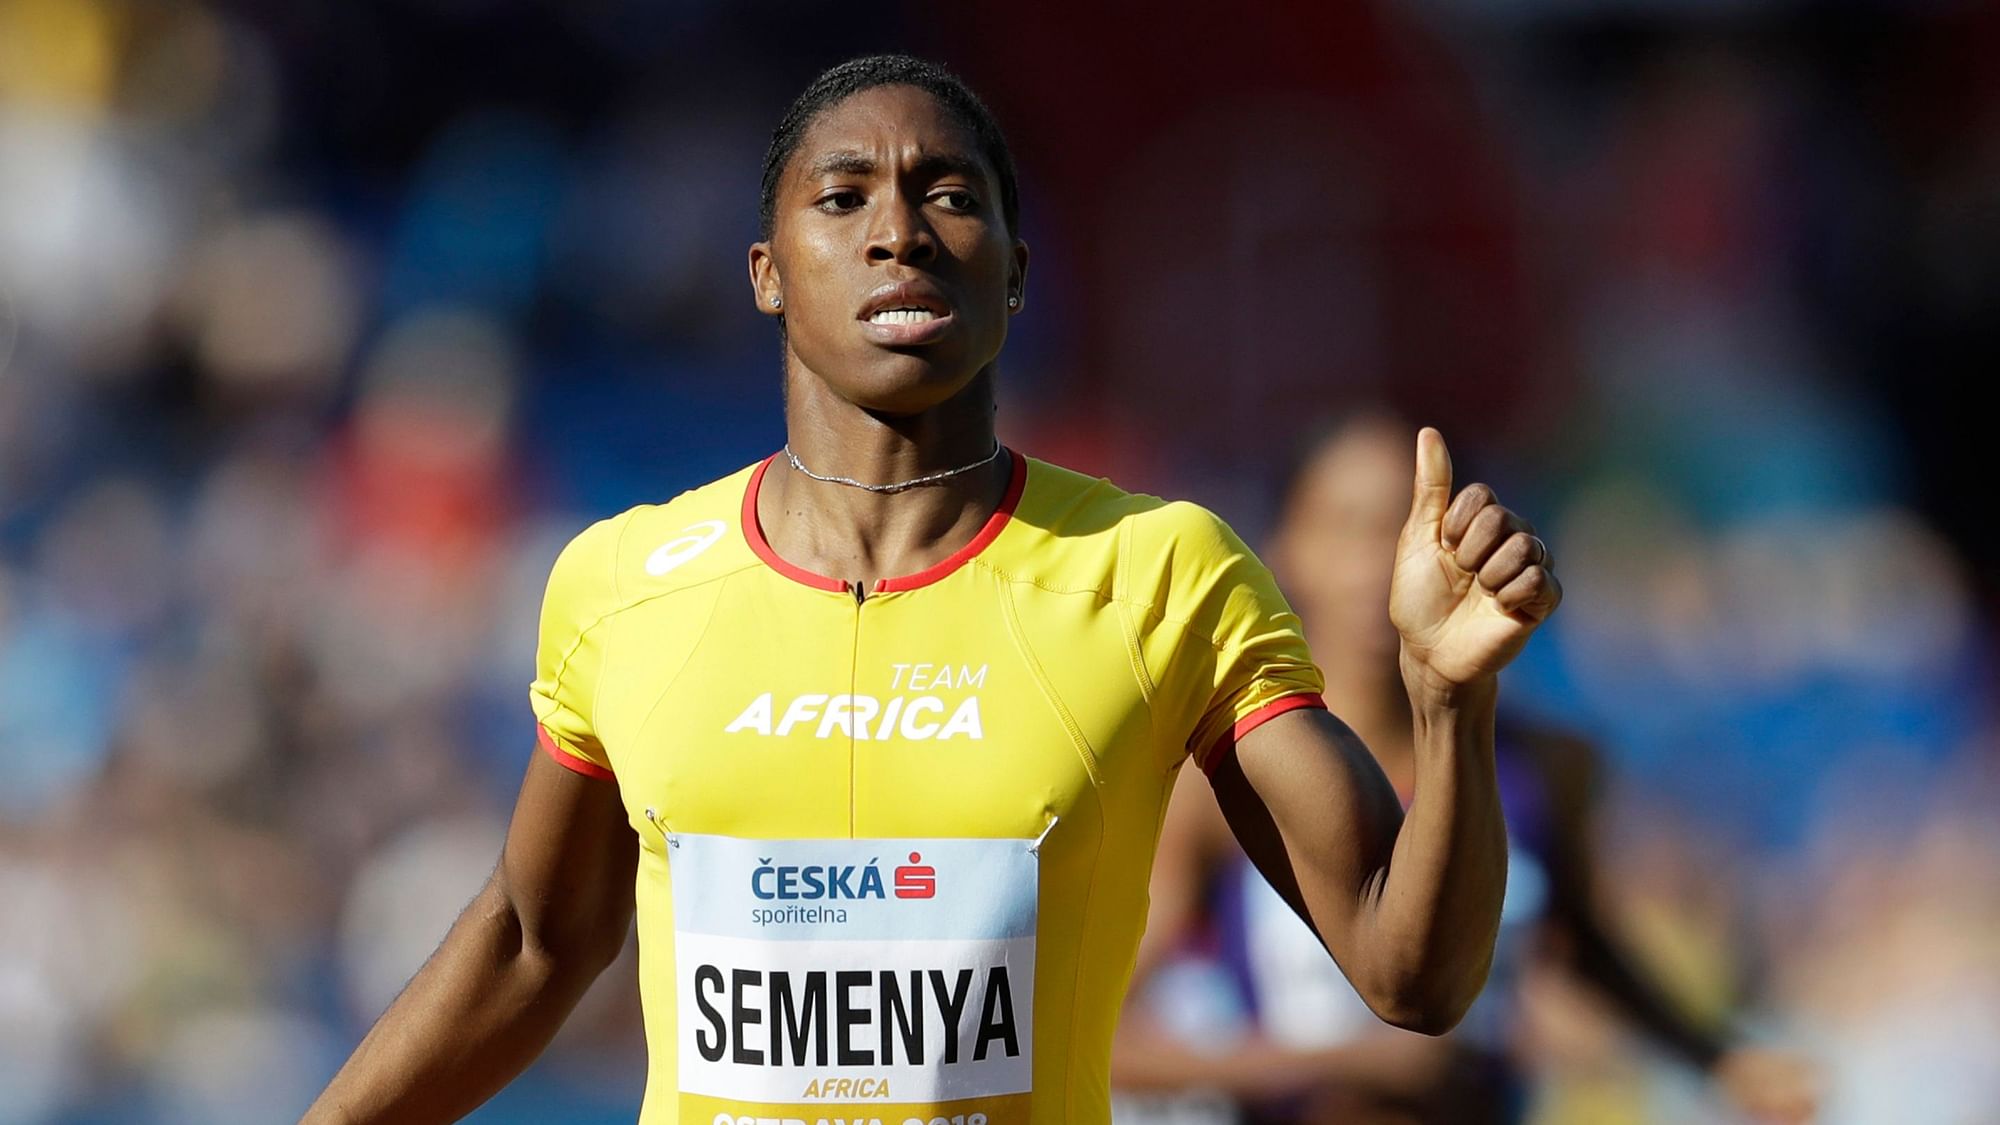 Female athlete Castor Semenya will have to take medication to lower her testosterone level